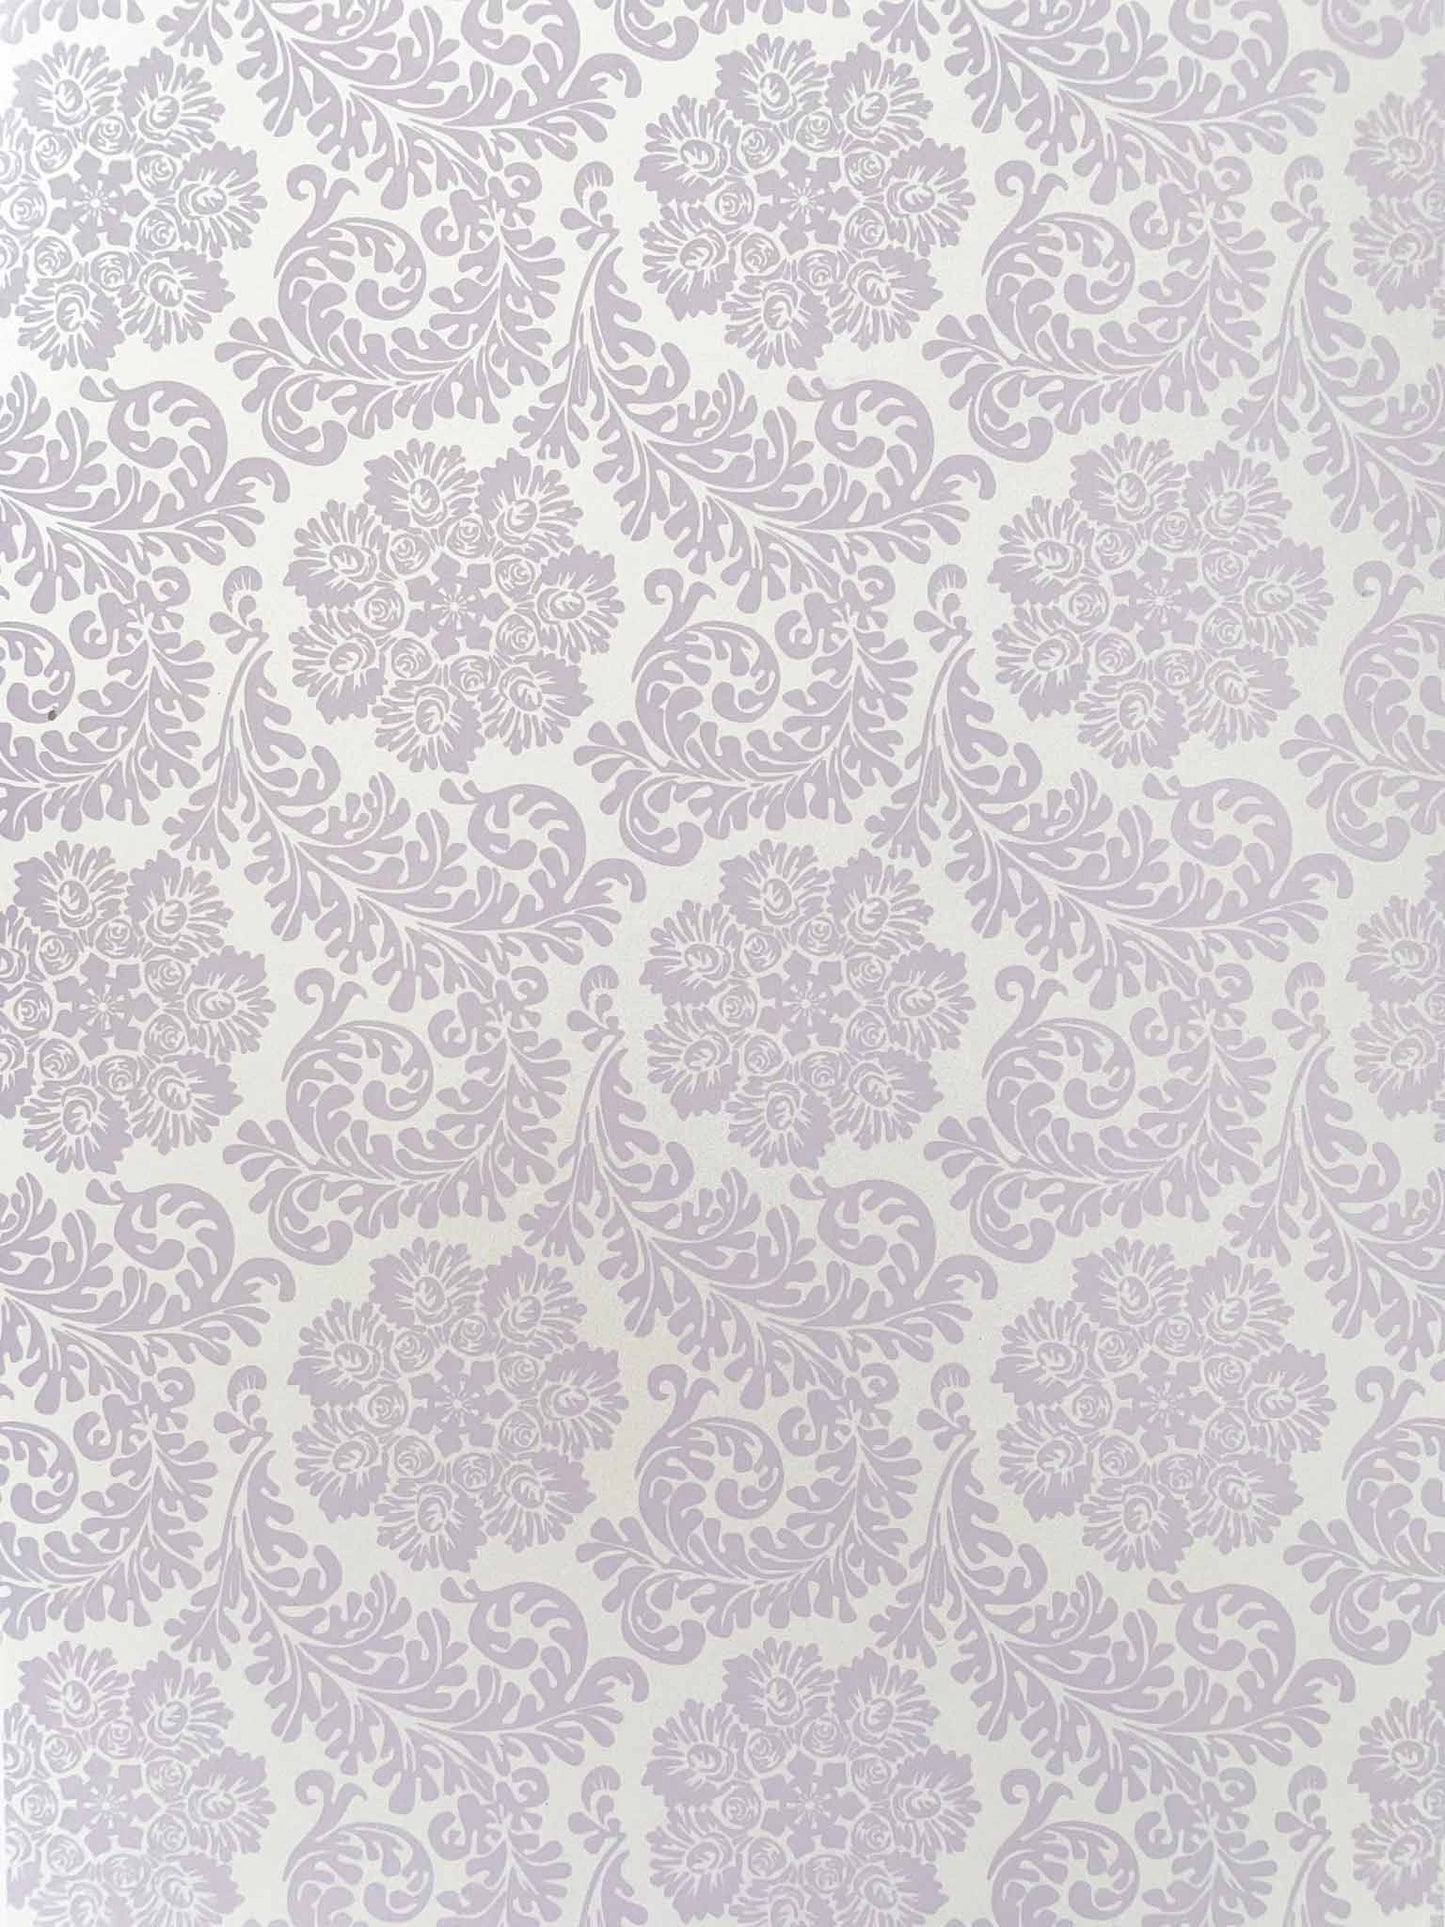 lilac-patterned-a4-paper